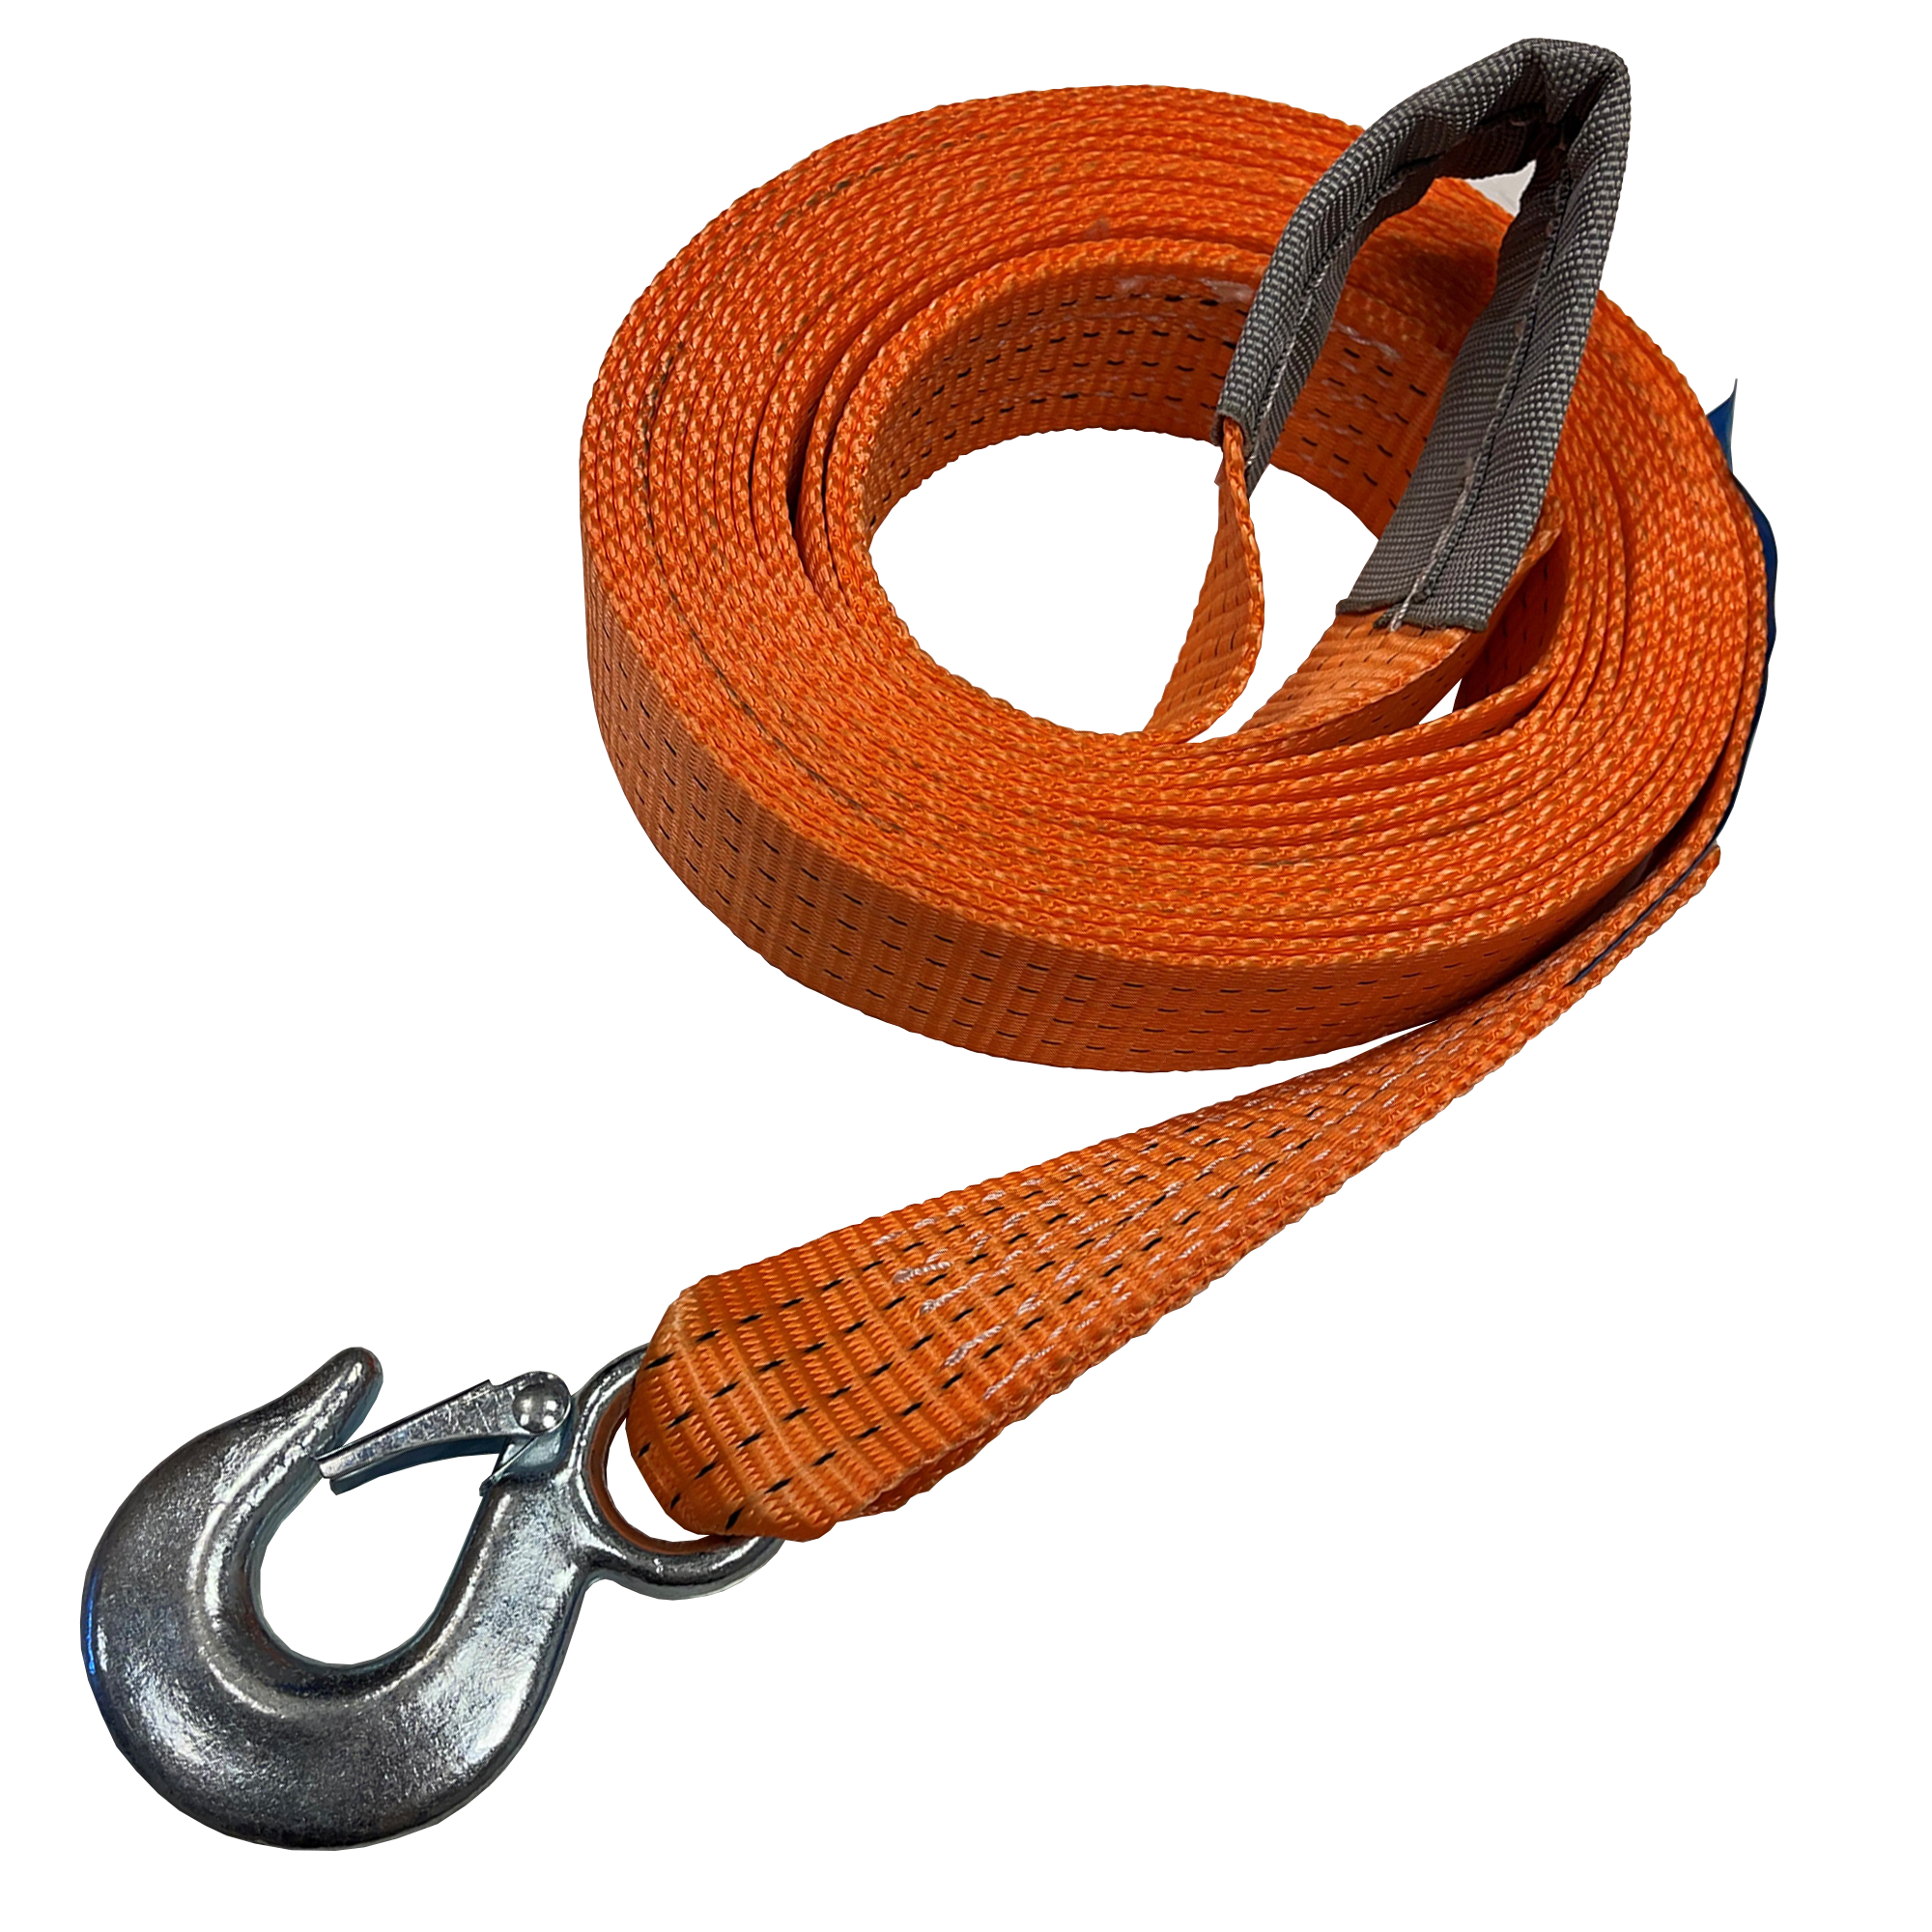 Recovery Tow Strap (Hook & Loop)